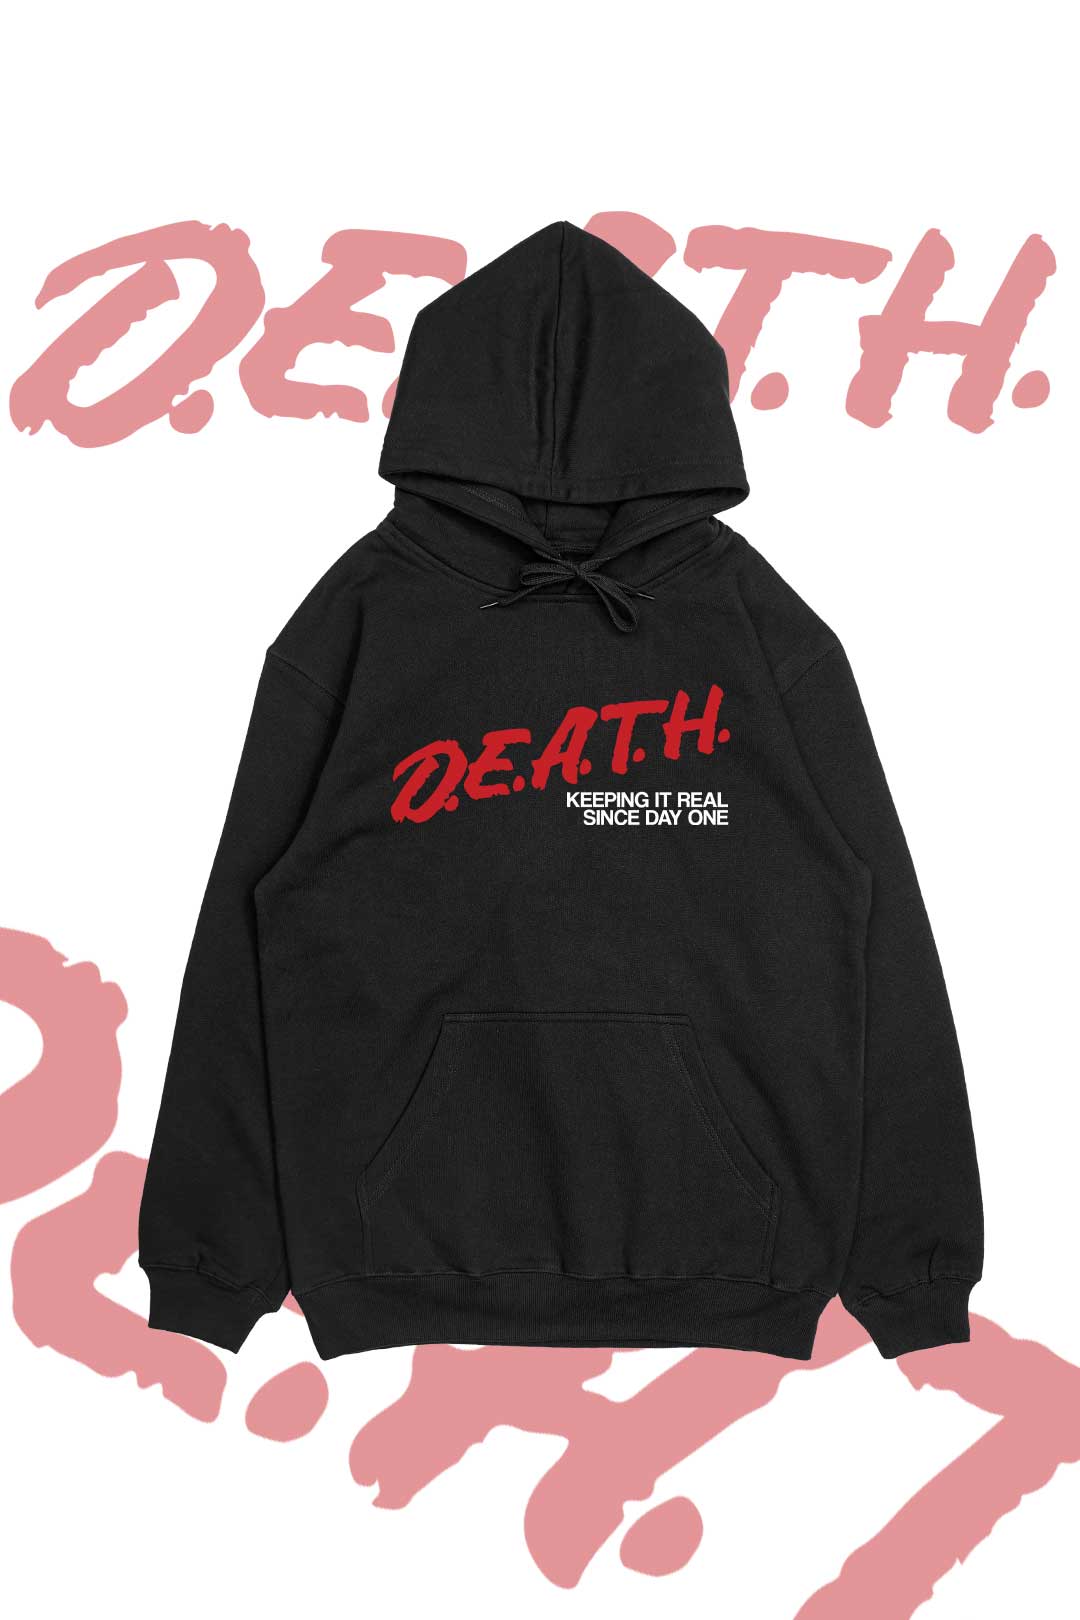 Keeping It Real Since Day One Goth Inspired Hoodie